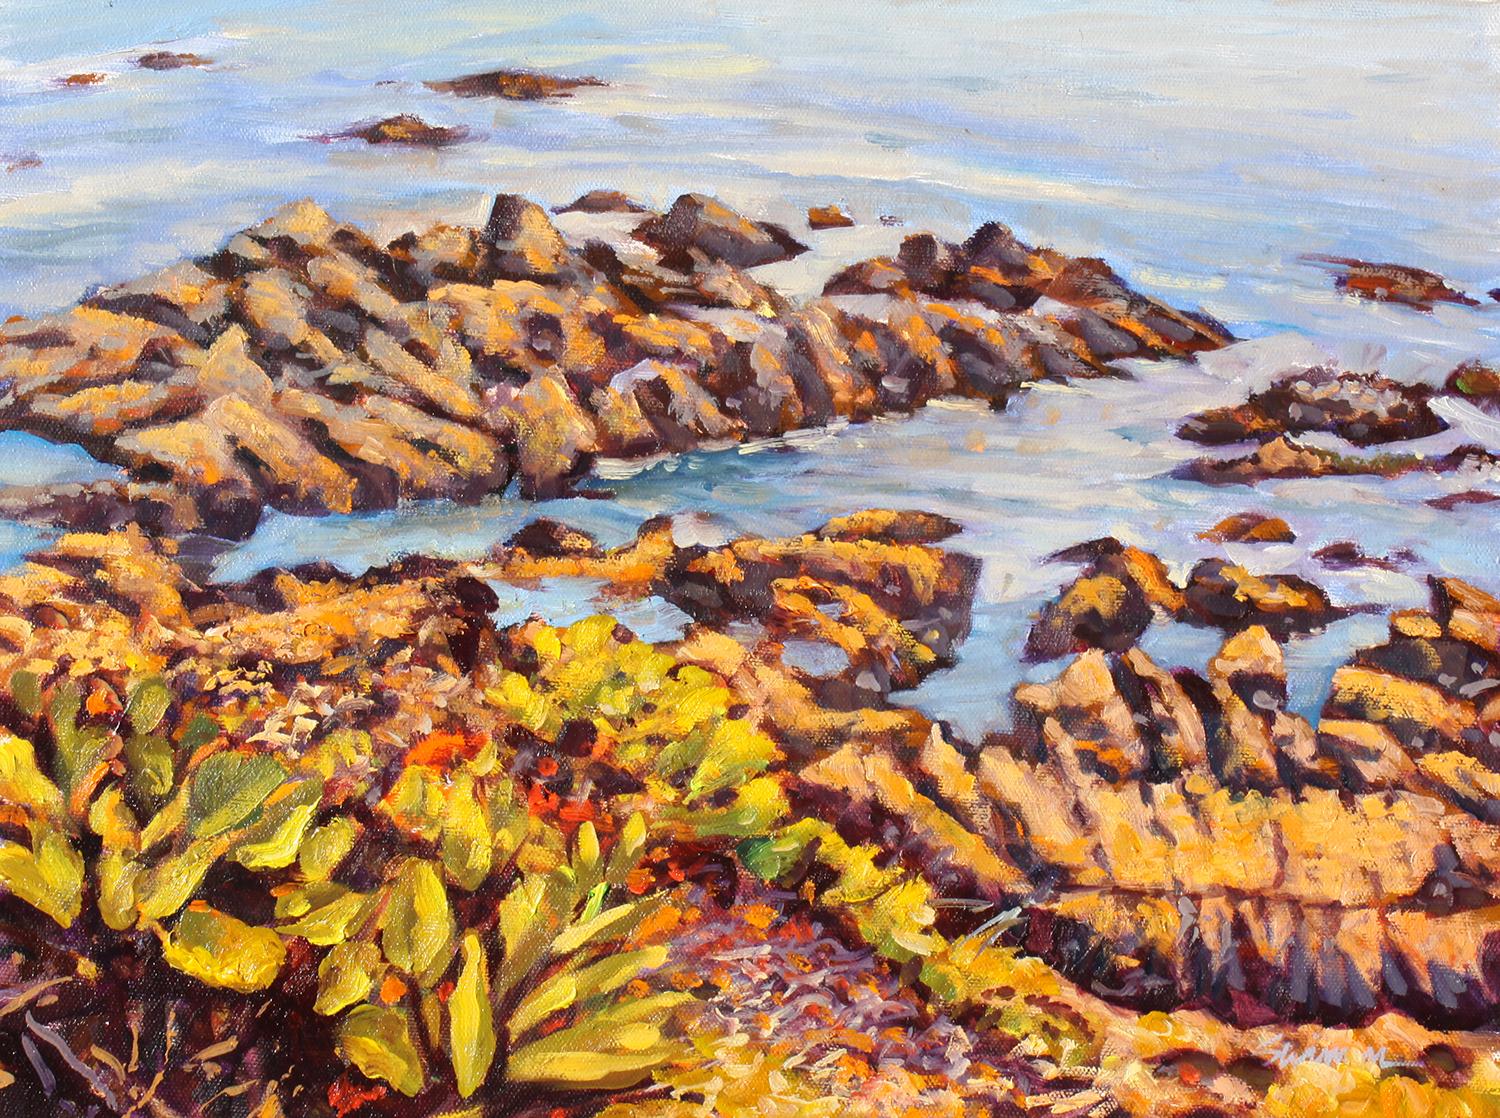 Tom Swimm Landscape Painting -  "Point Lobos" California Coastal Oil Painting With Atmospheric Ocean